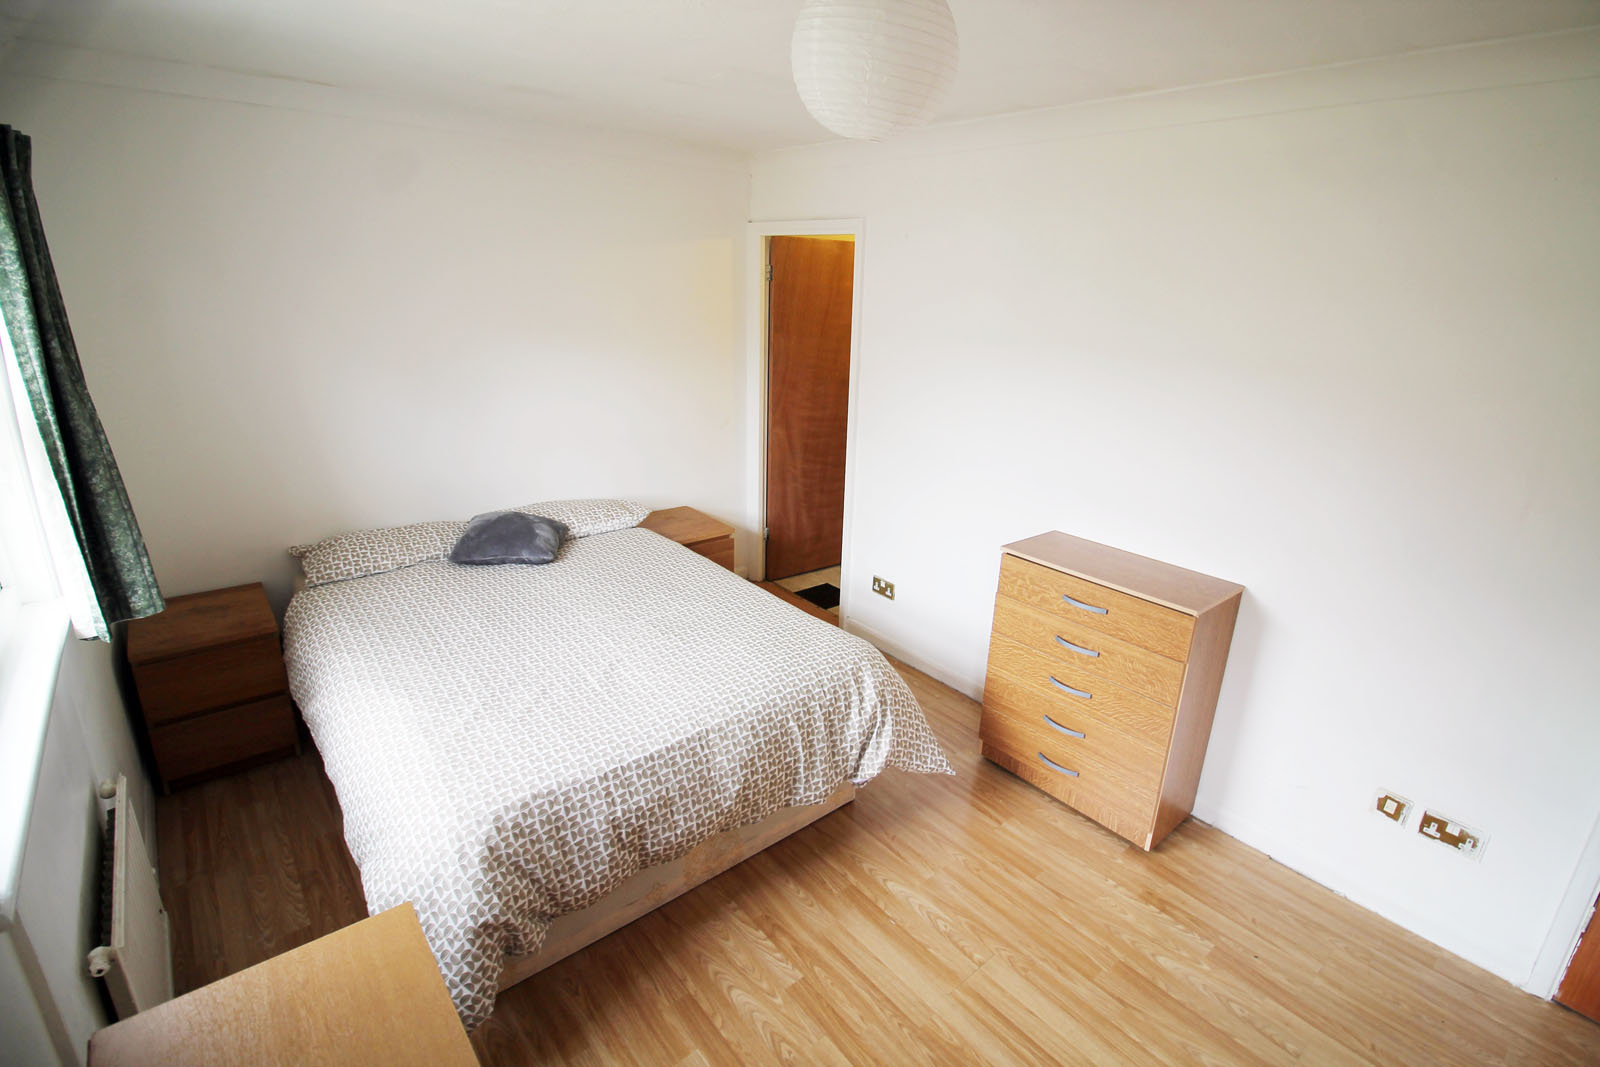 Ensuite bedroom available for affordable rent. RoomsLocal image